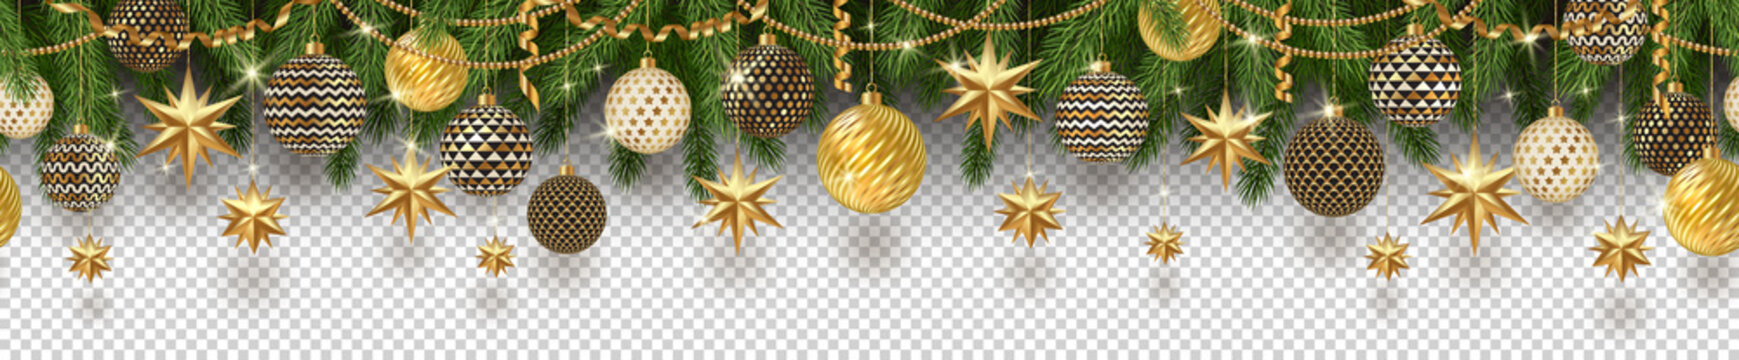 Christmas golden decoration and Christmas tree branches on a checkered background. Can be used on any background. Seamless frieze. Vector illustration.